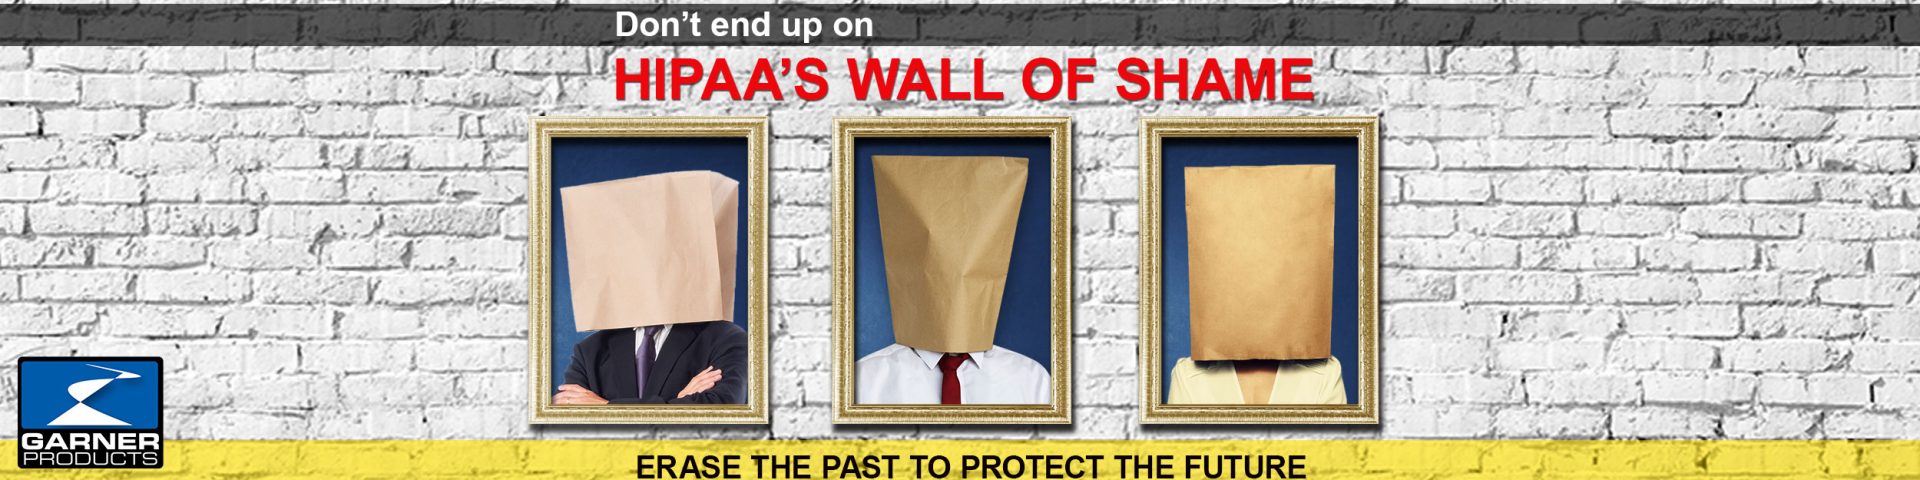 wall-of-shame-1920x480